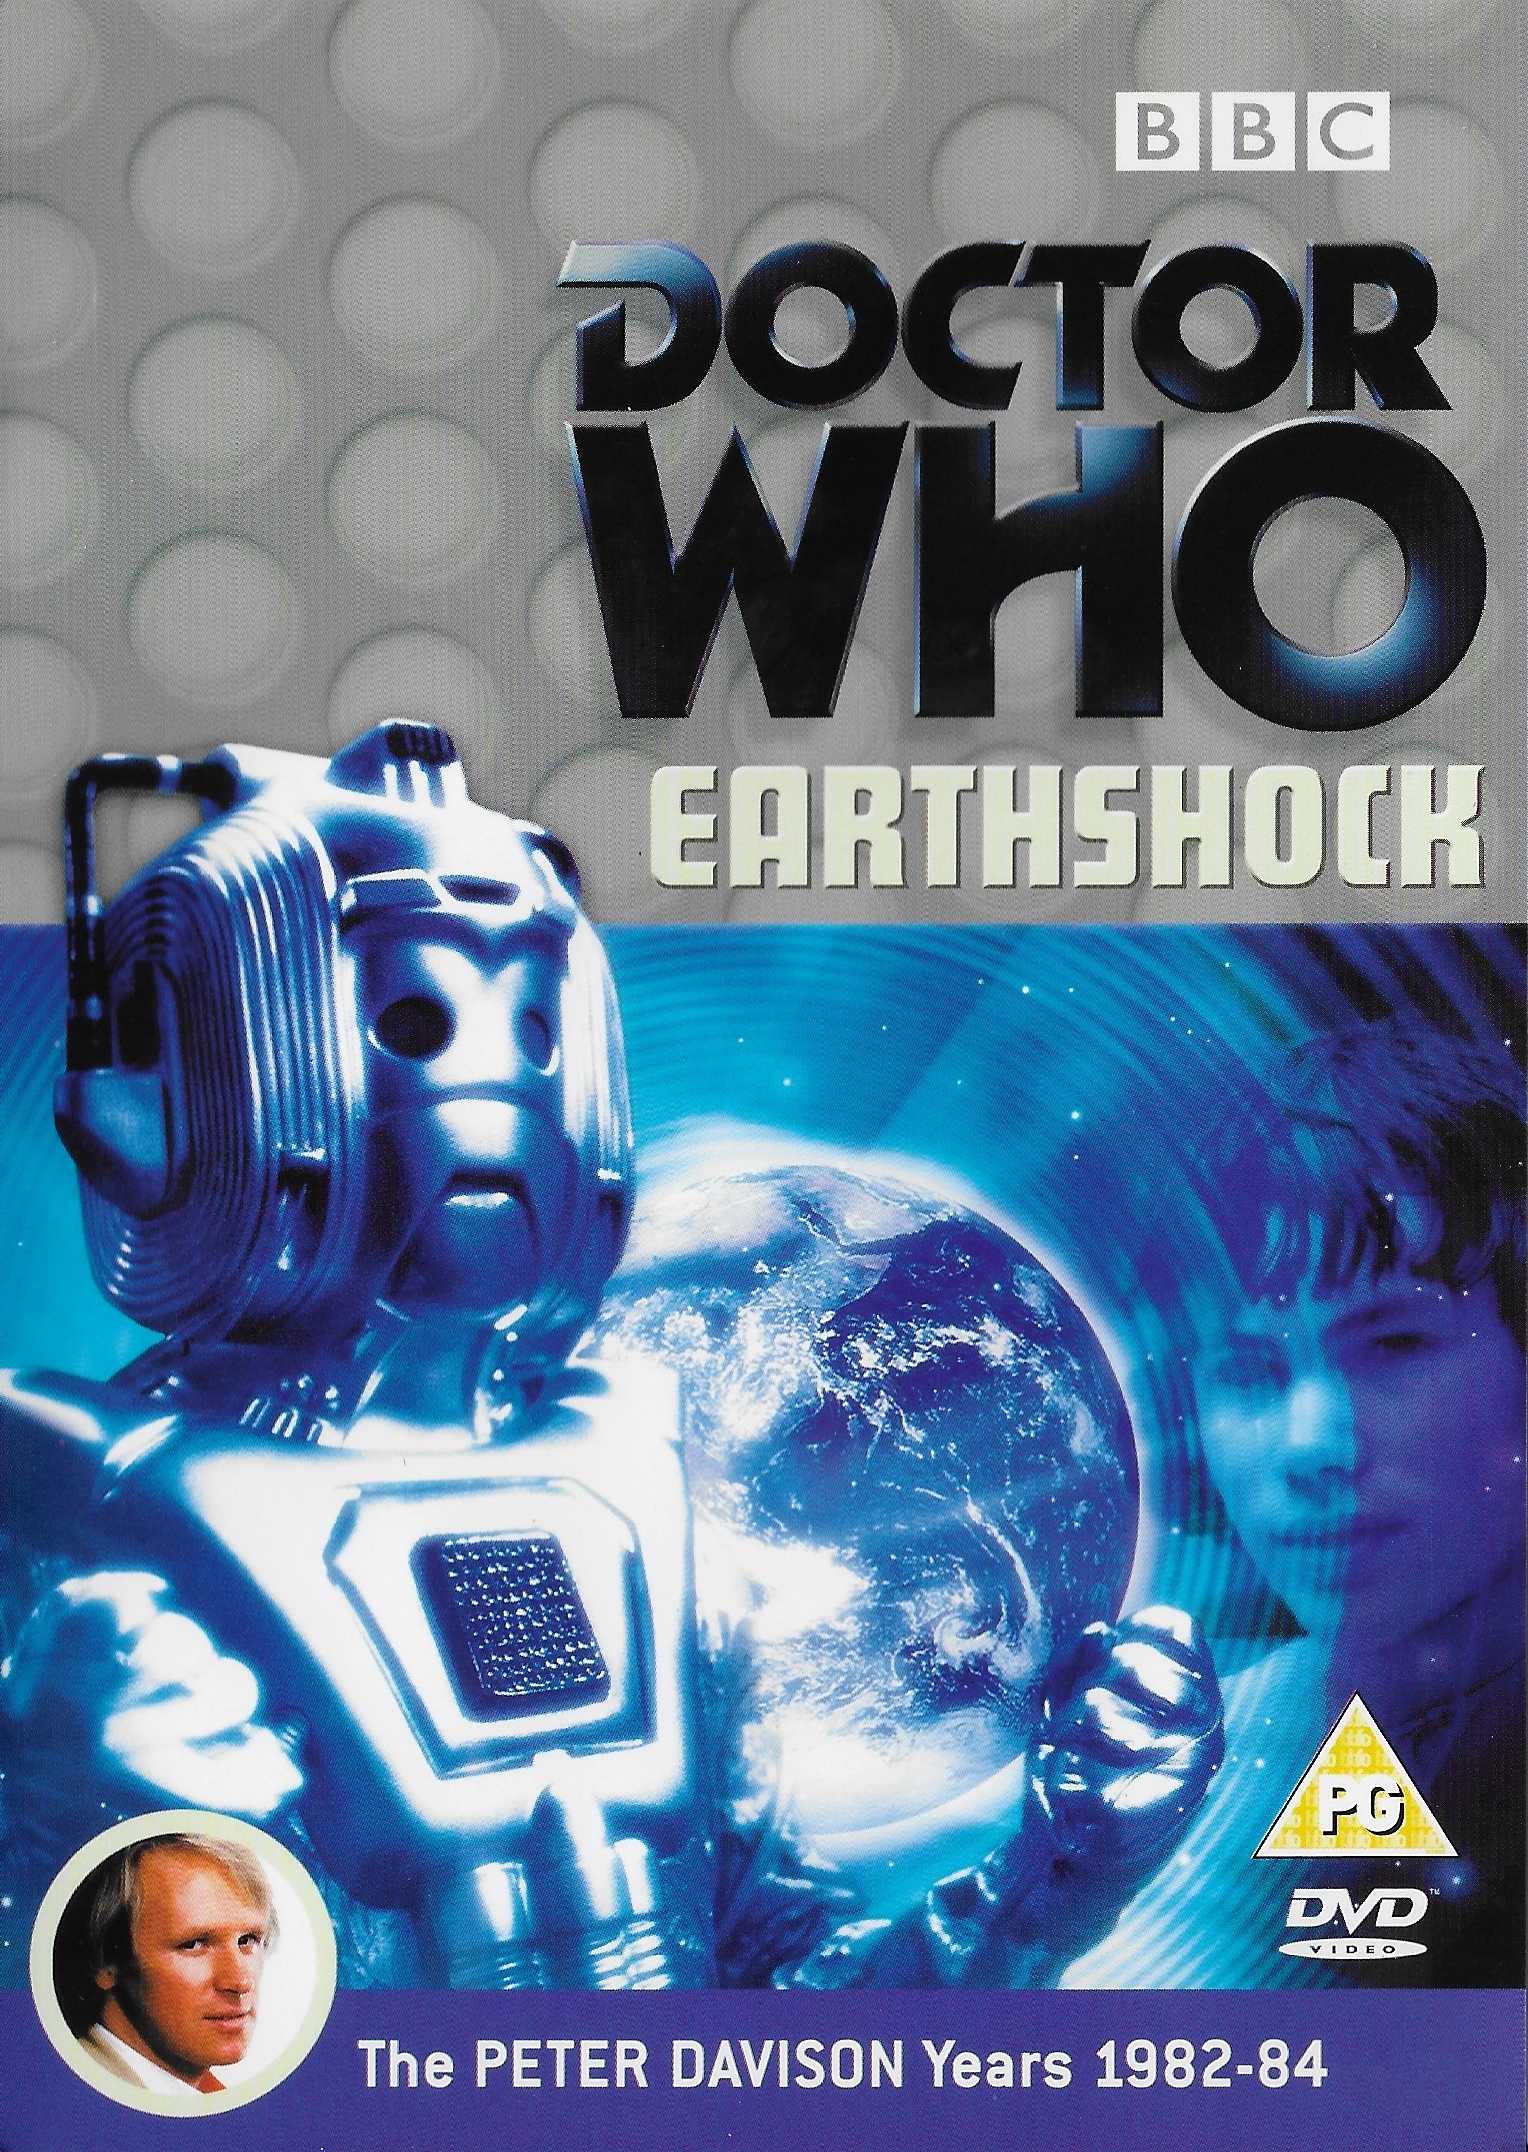 Picture of BBCDVD 1153 Doctor Who - Earthshock by artist Eric Saward from the BBC records and Tapes library